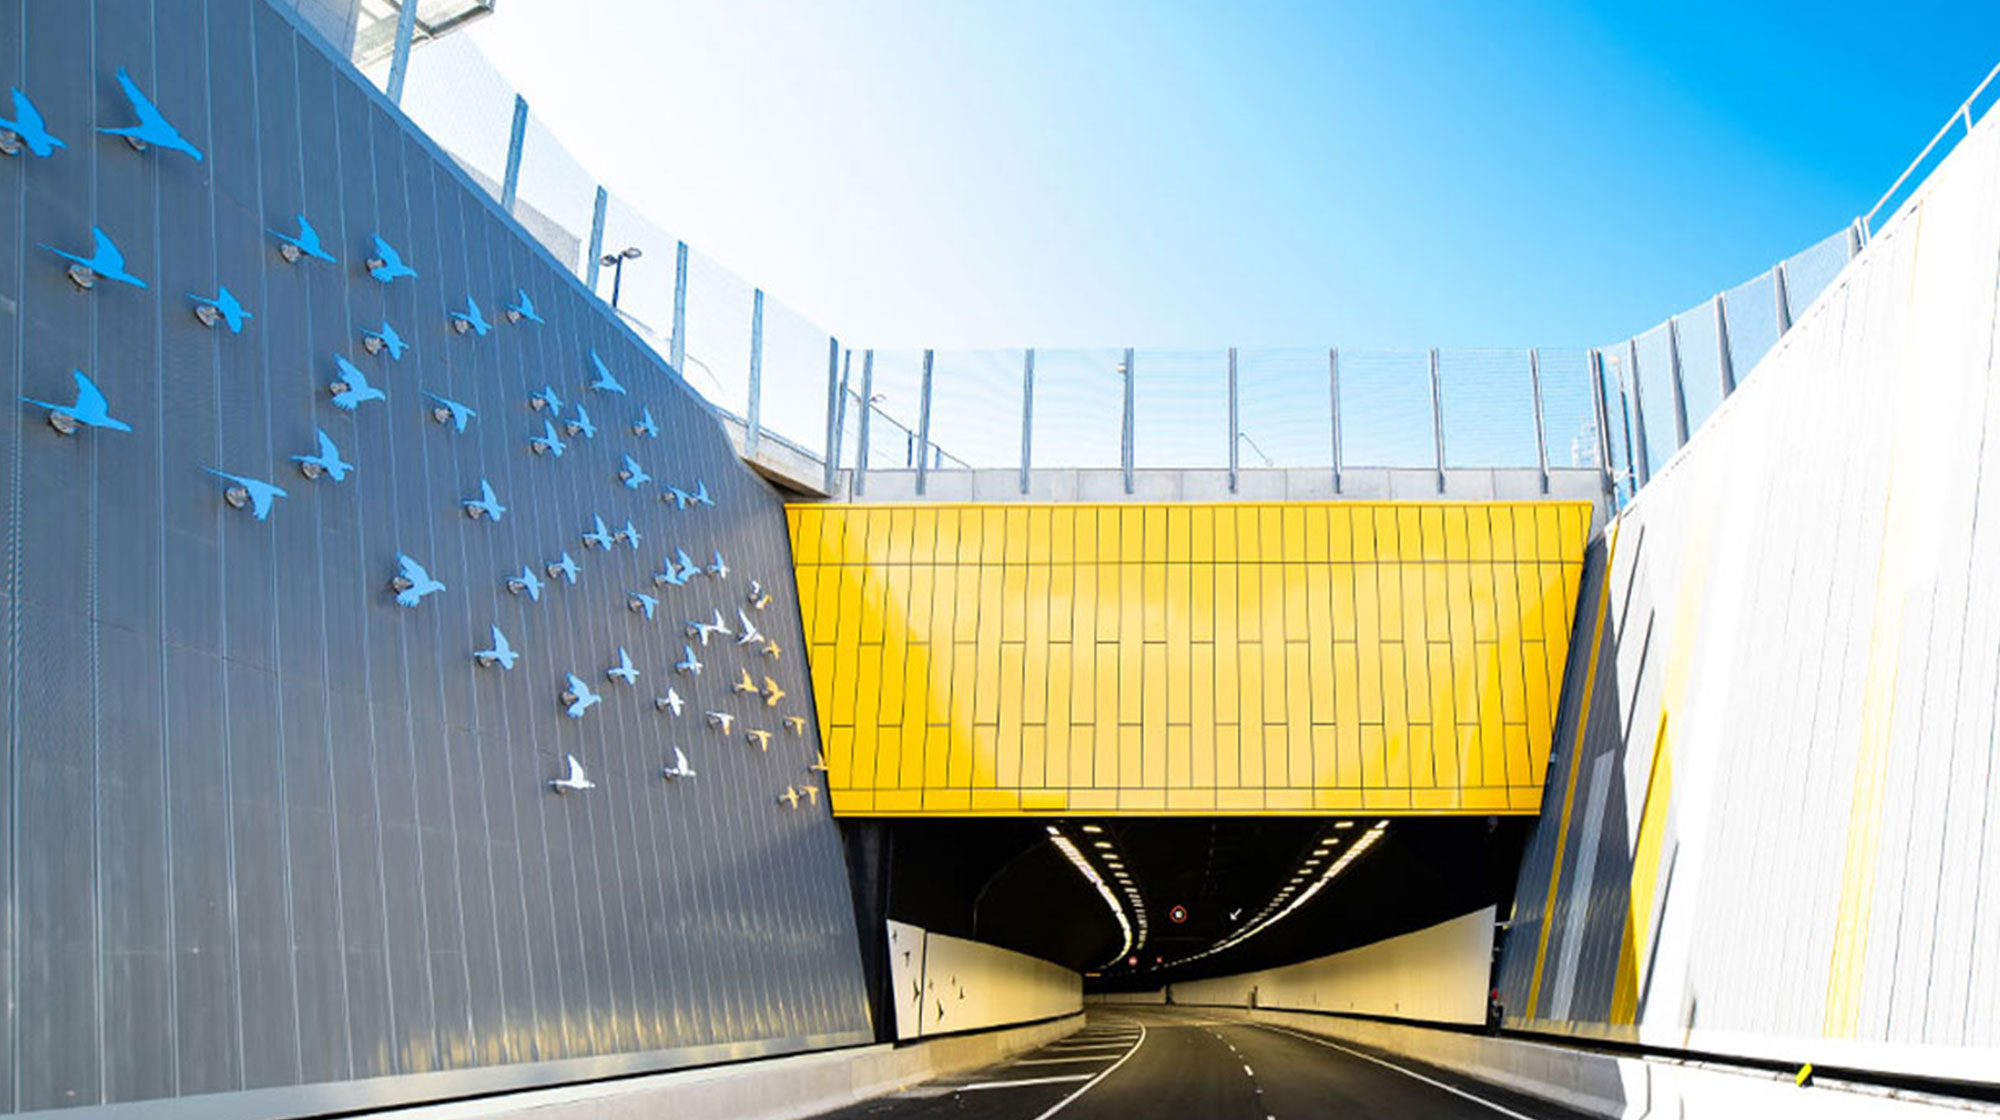 Northconnex tunnel infrastructure project by CM+